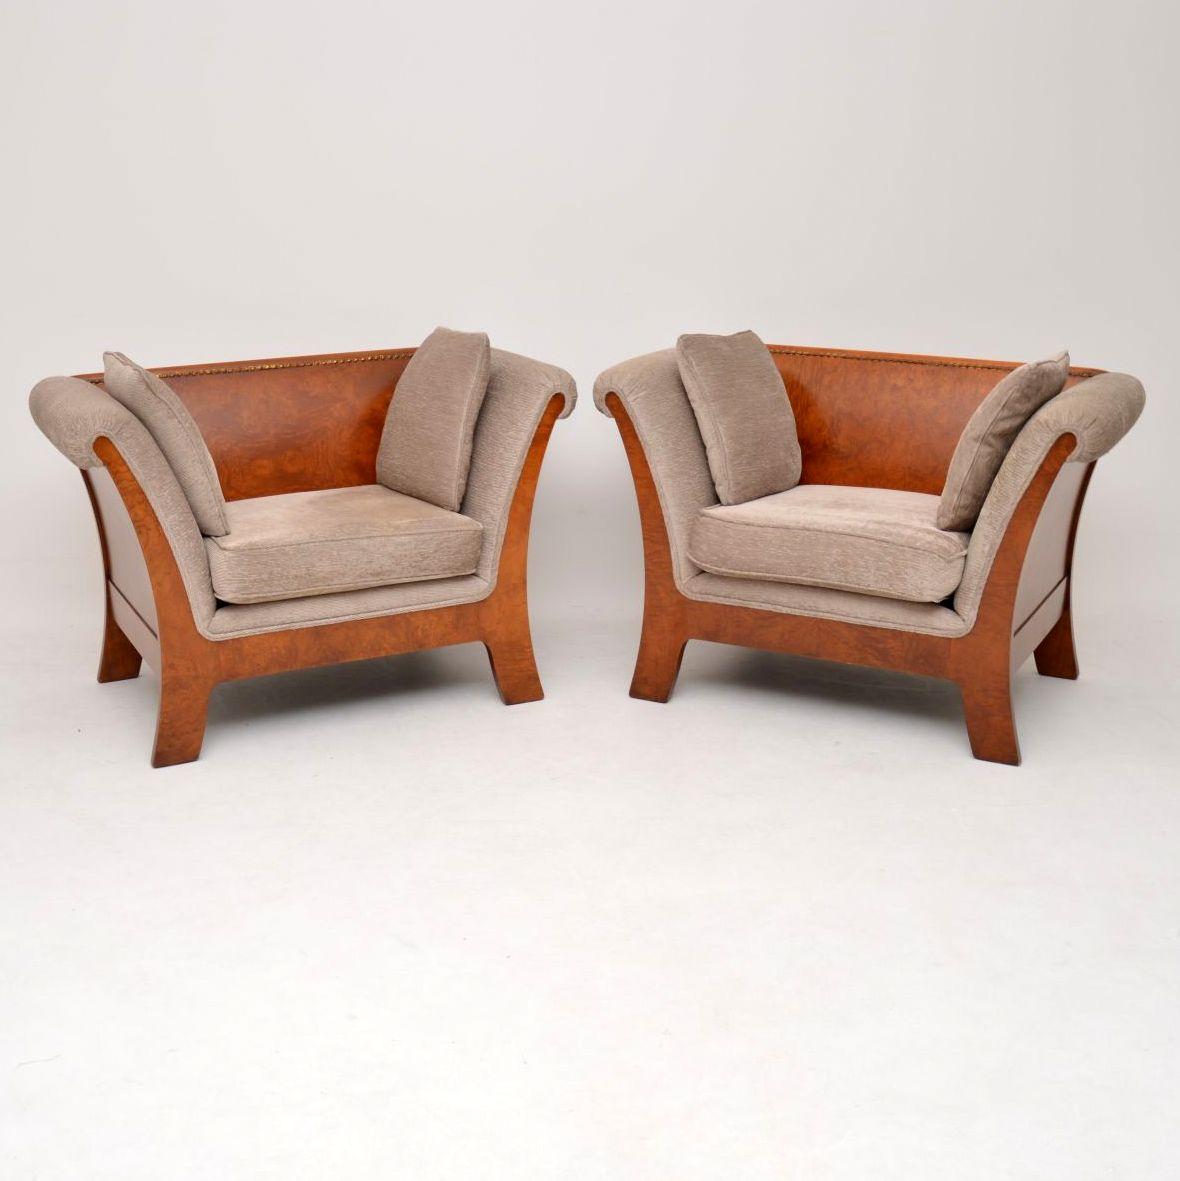 Fabulous pair of antique Swedish armchairs with quite wide proportions and in very good condition. The previous owner bought these in a London antique shop about 25 years ago and just had them re-upholstered, so the fabric is perfect. The polished